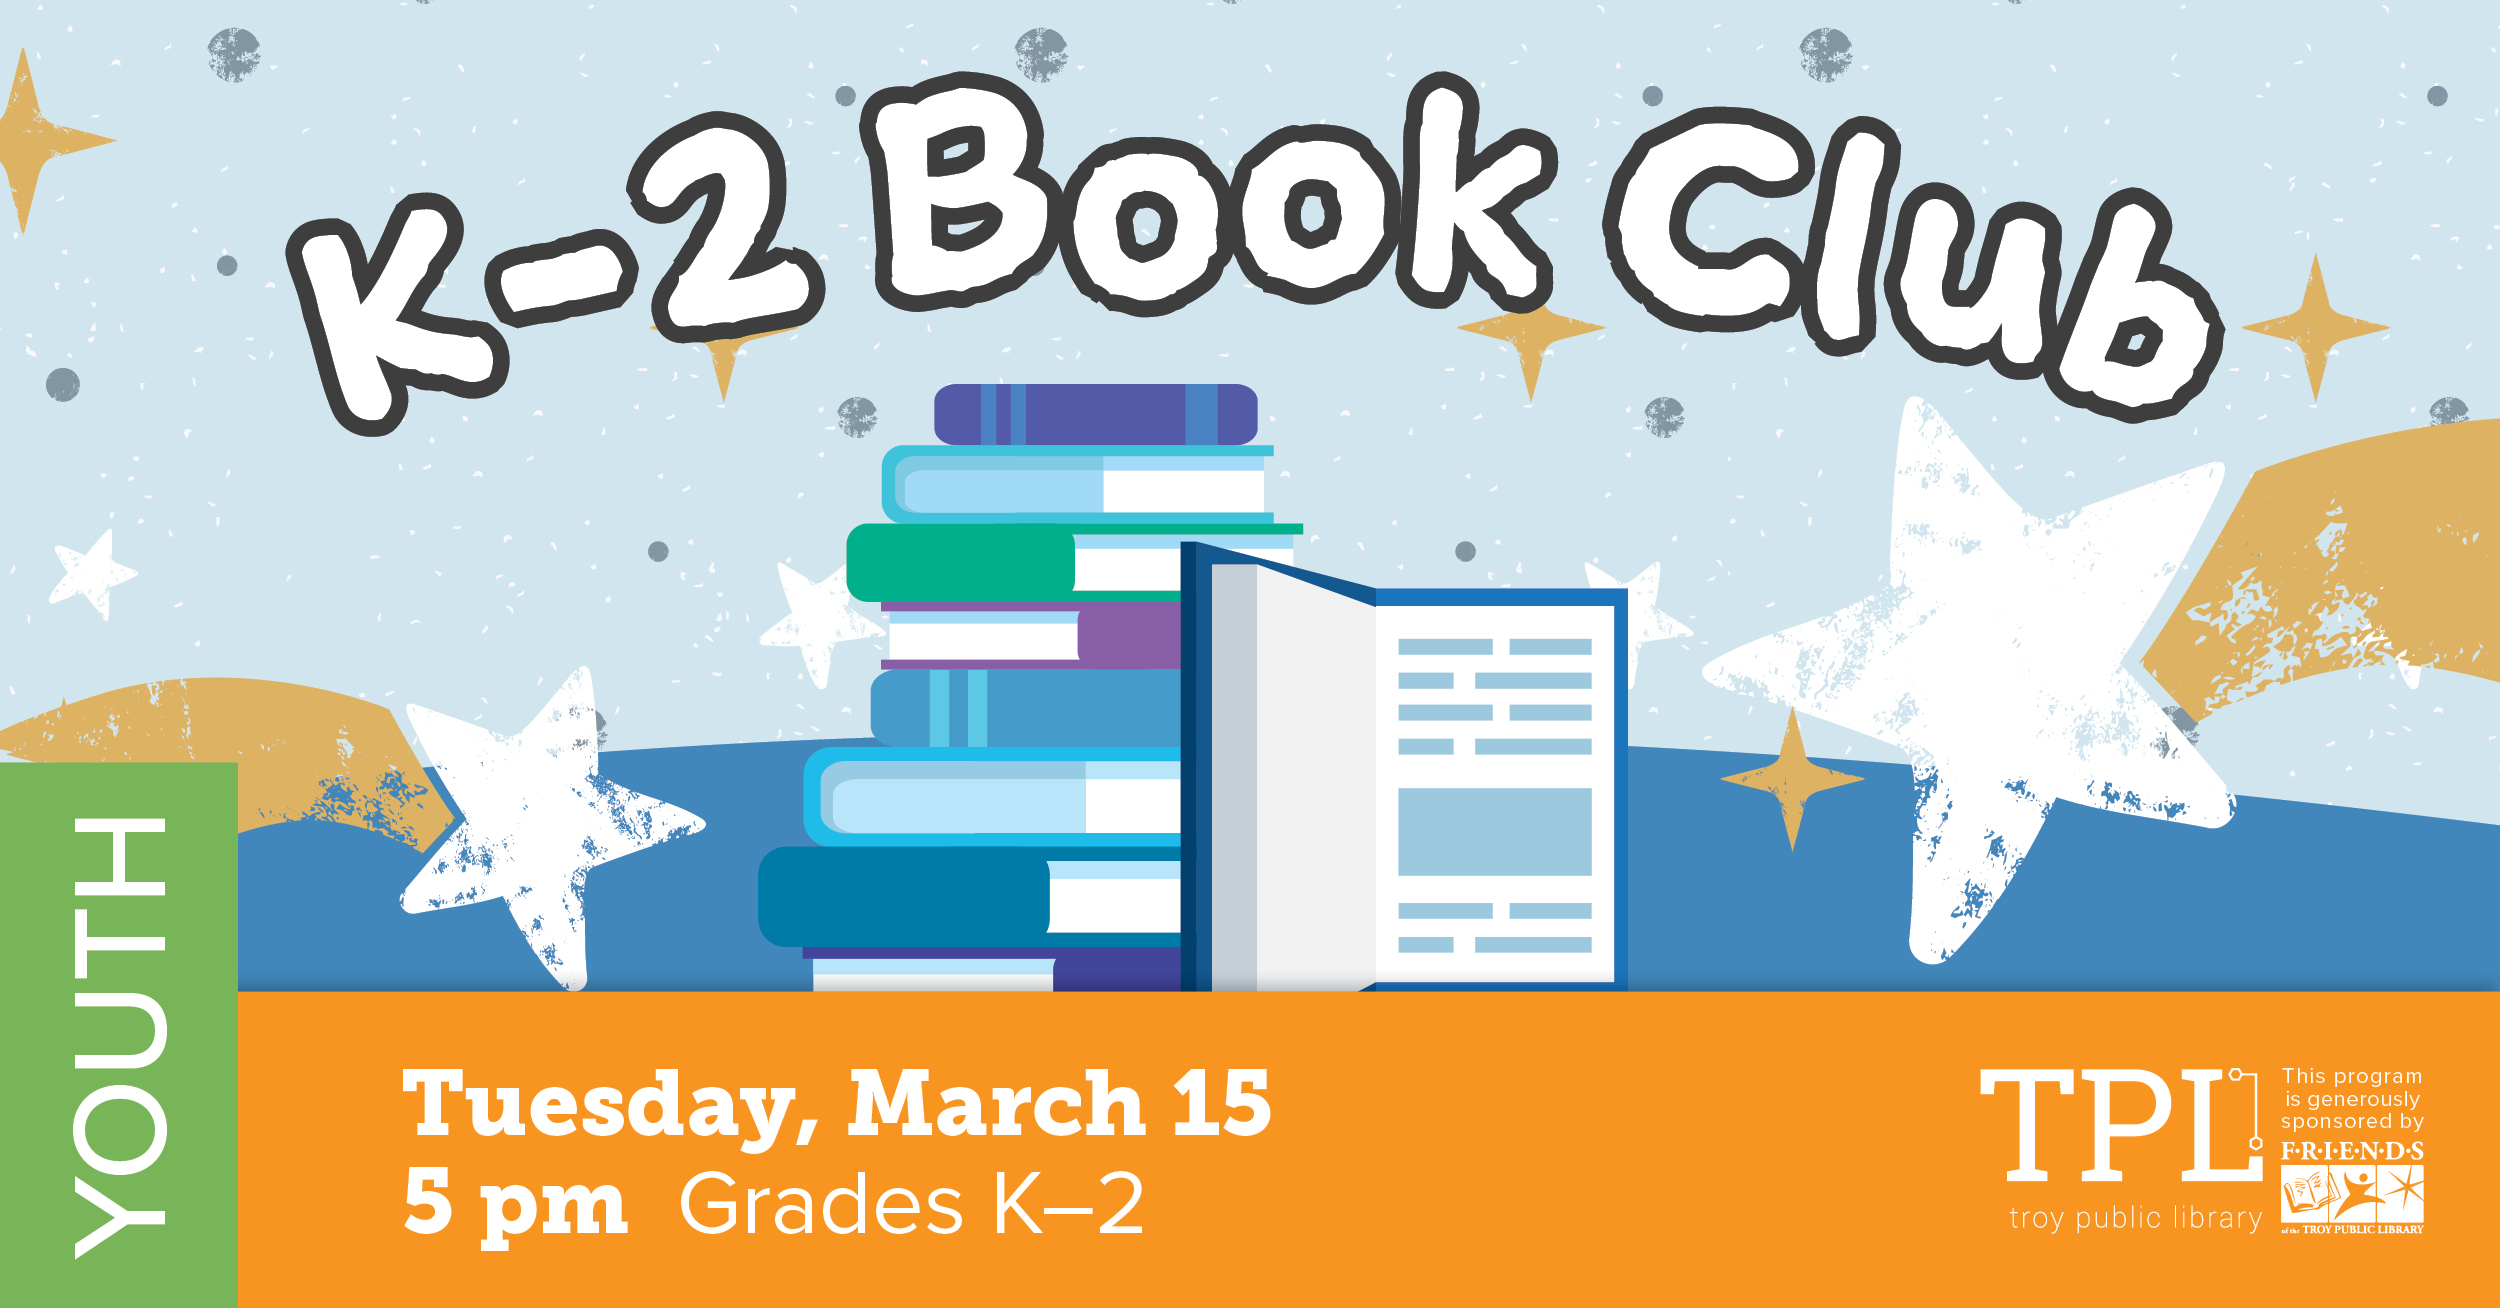 K-2 Book Club Tuesday, March 15 at 5pm. Grades K-2. Sponsored by the Friends of the Troy Public Library